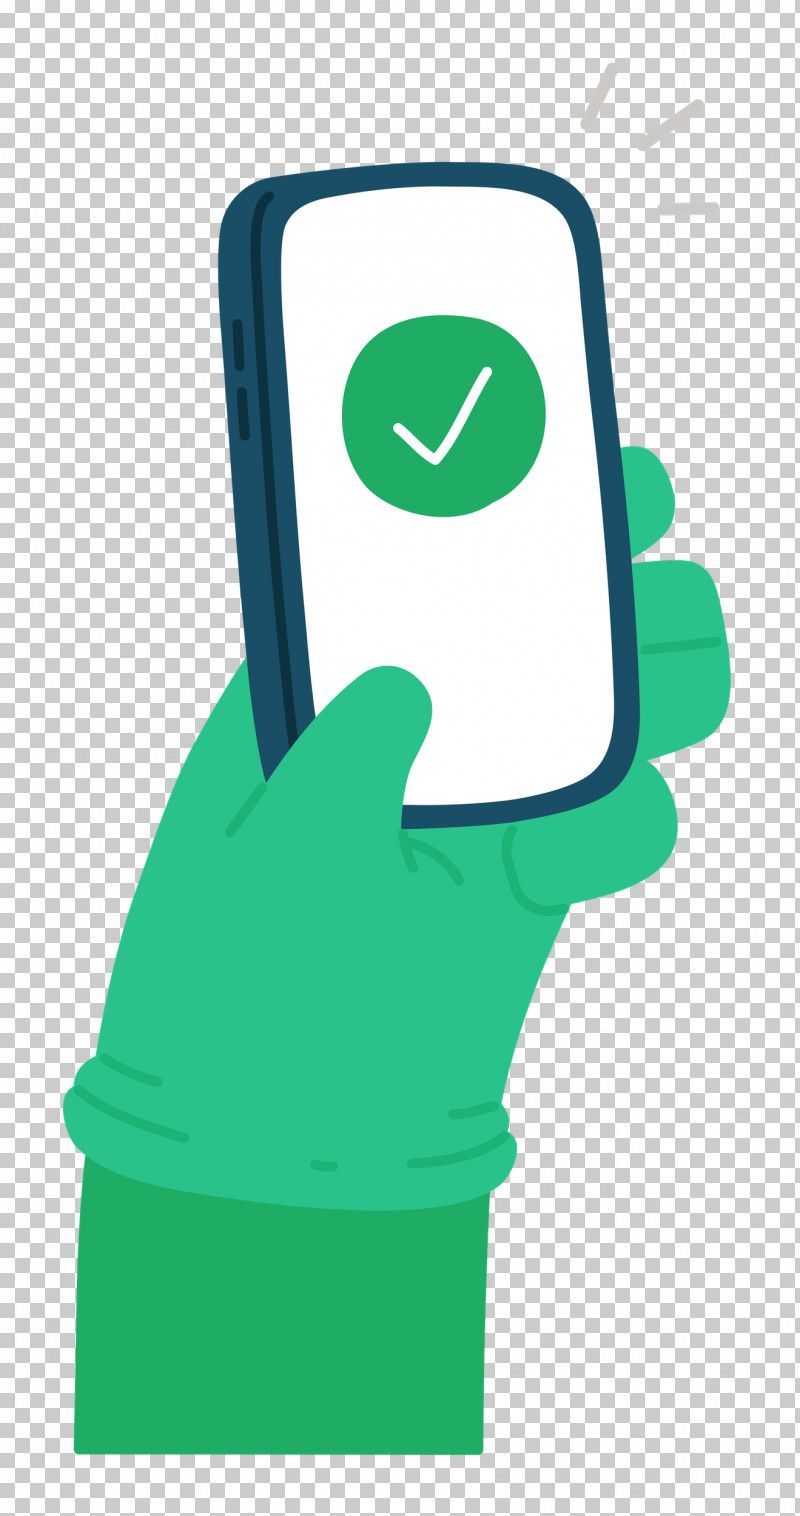 Phone Checkmark Hand PNG, Clipart, Checkmark, Geometry, Green, Hand, Hat Free PNG Download